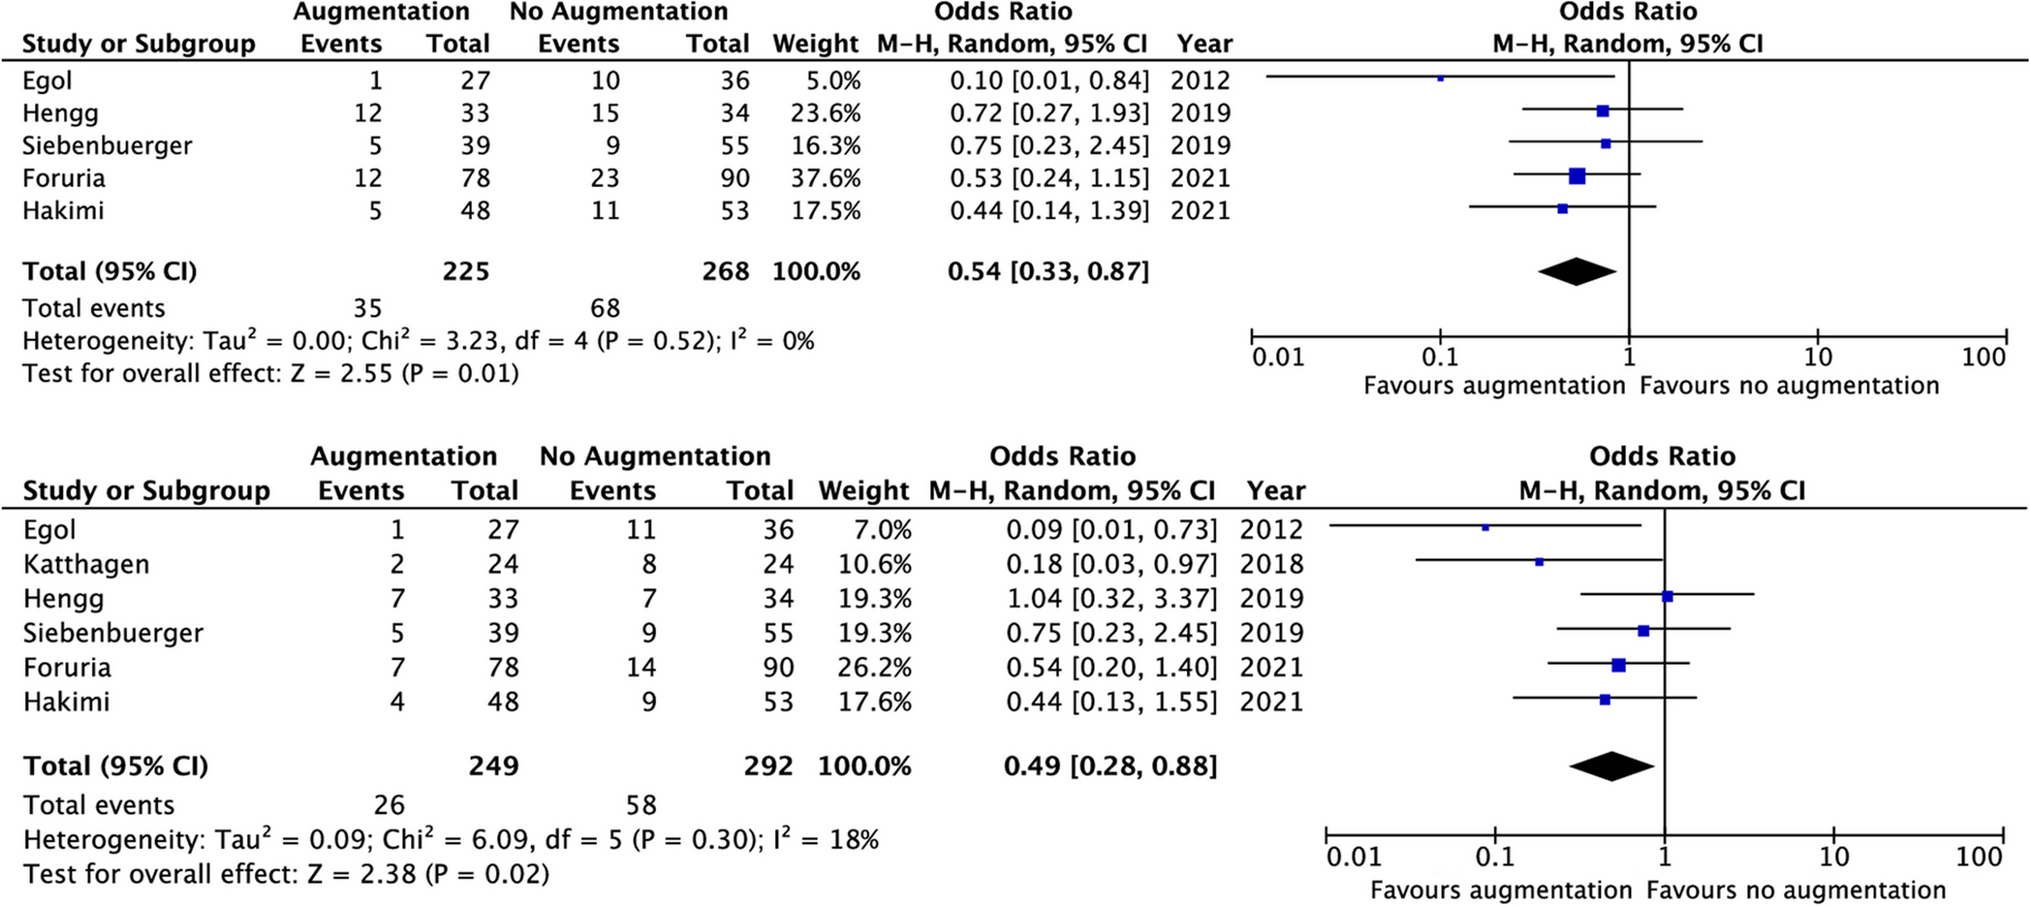 Cement augmentation for proximal humerus fractures: a meta-analysis of randomized trials and observational studies